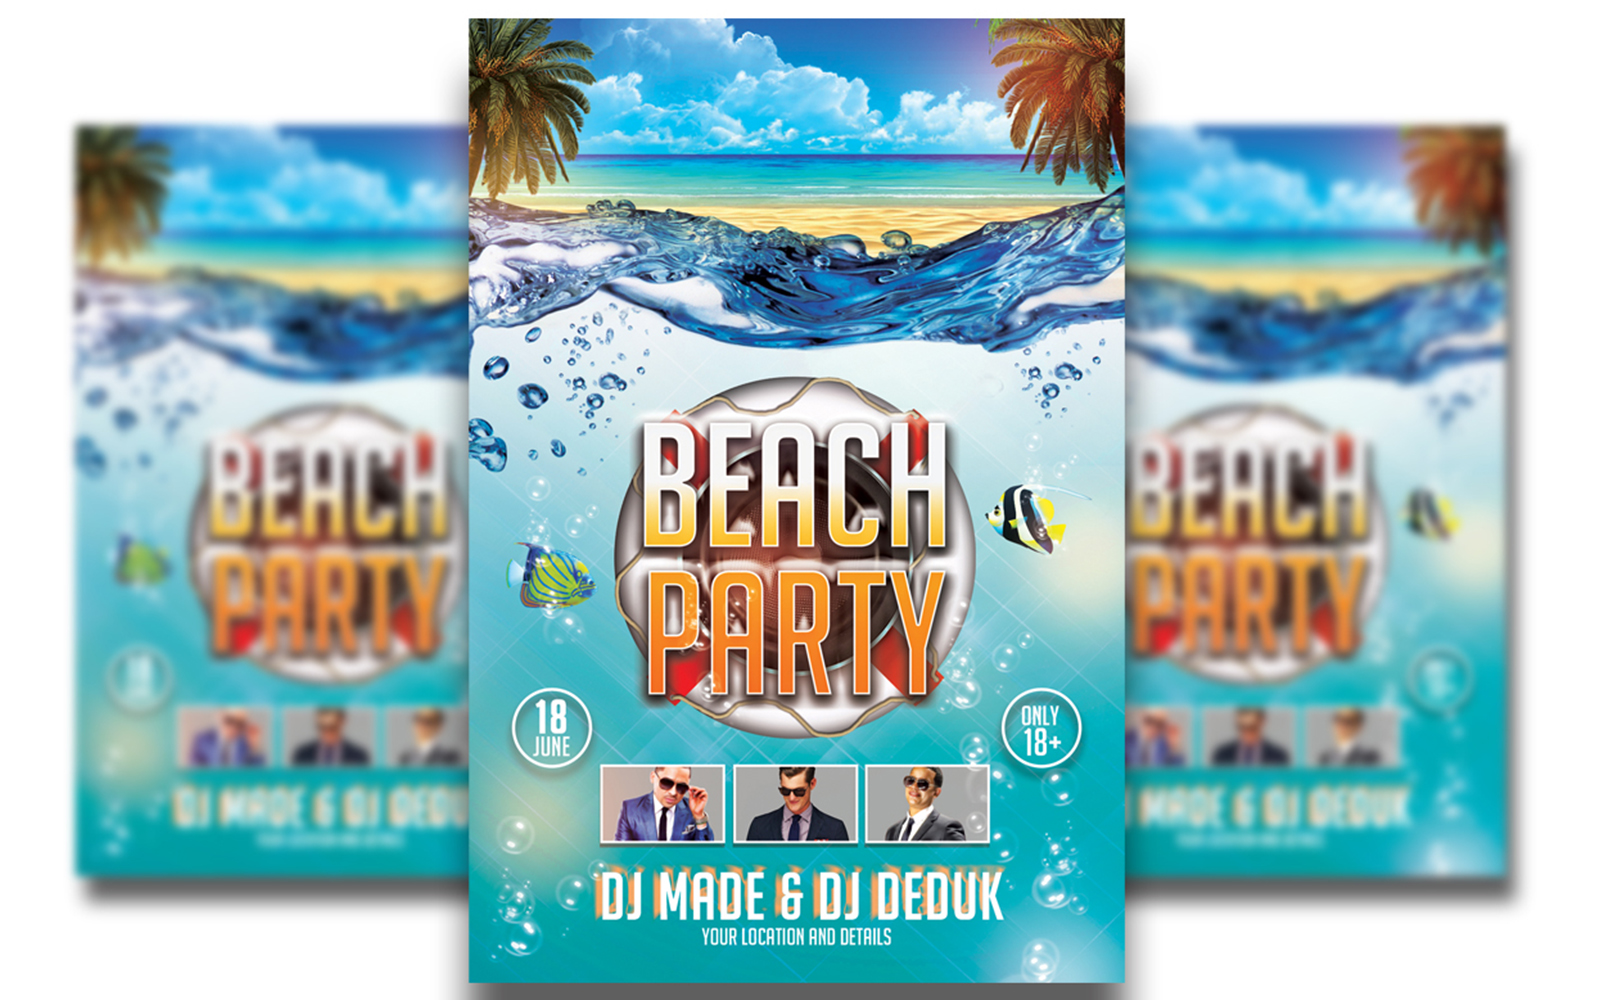 Beach Party Flyer Template #2